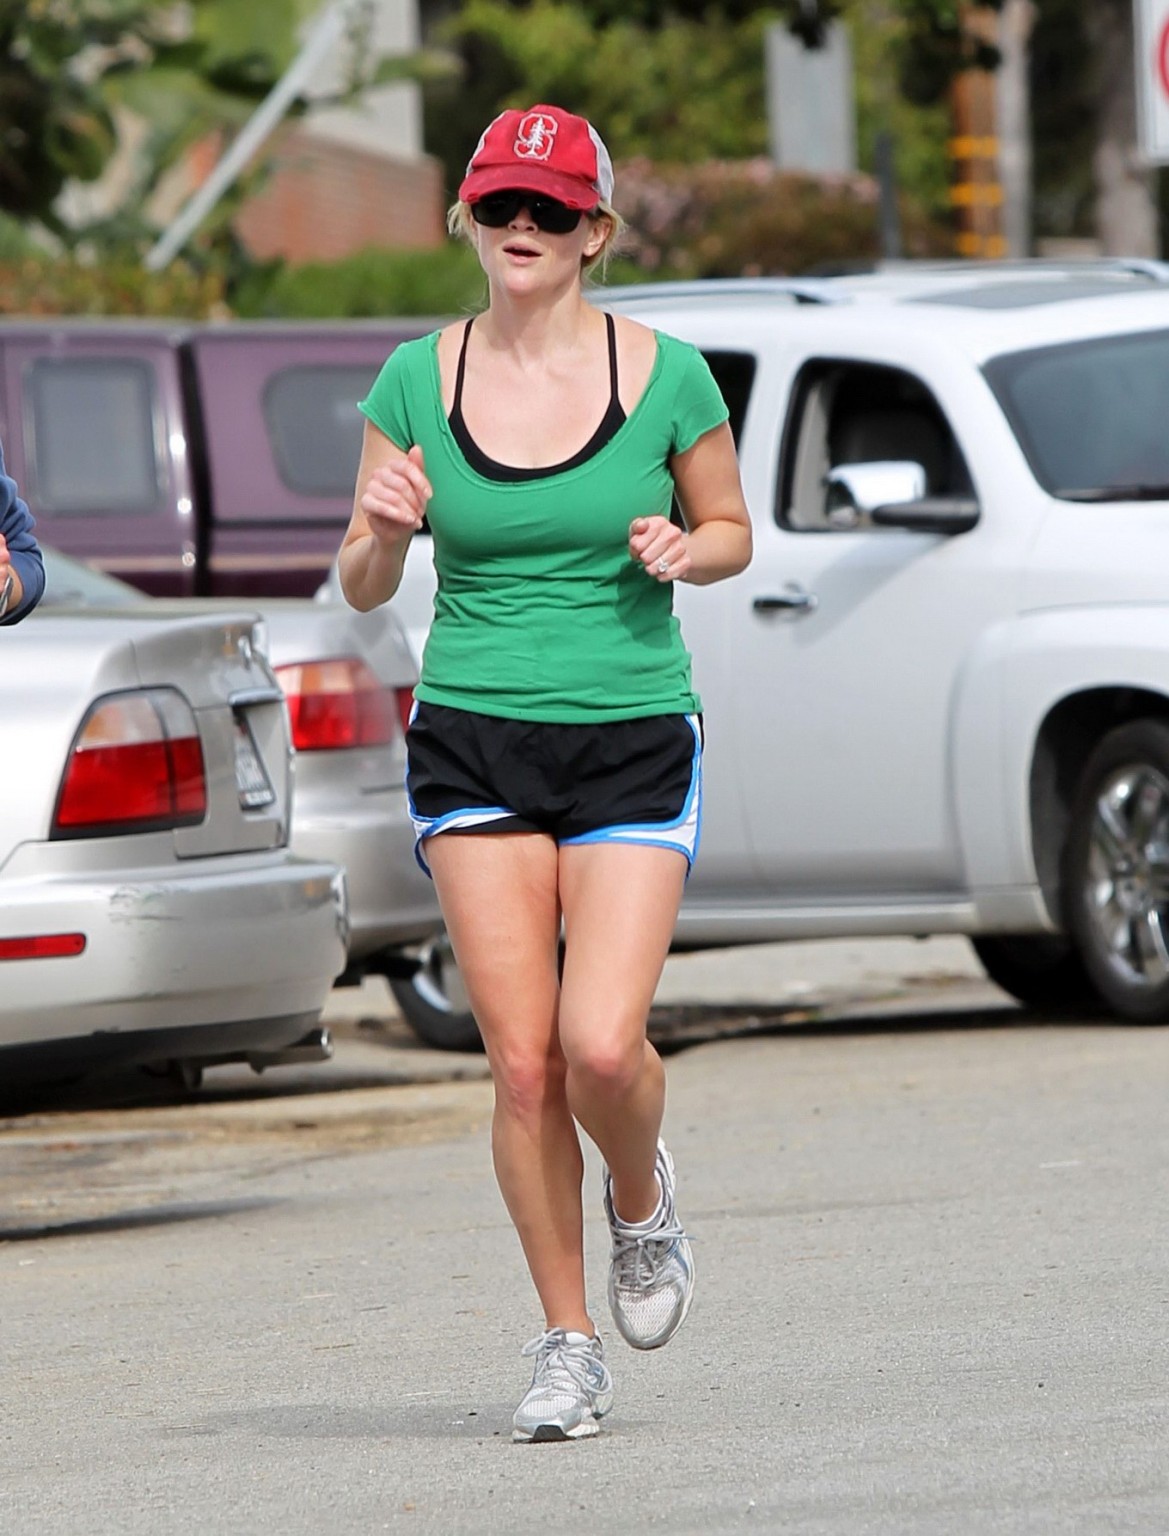 Reese Witherspoon langbeinig in Shorts beim Joggen in Brentwood
 #75312823